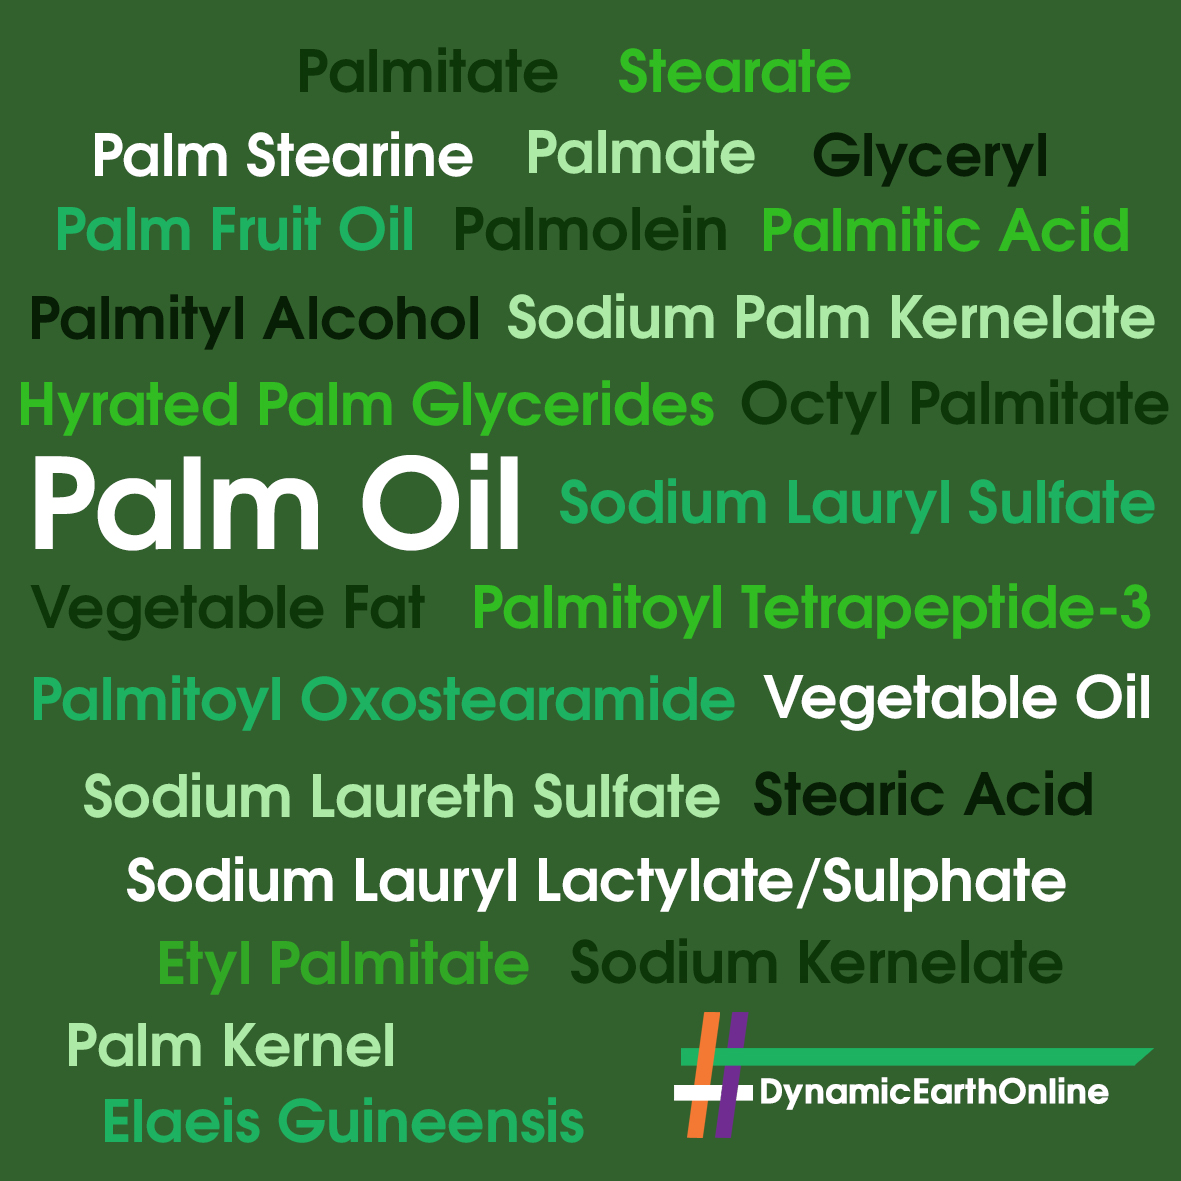 Other names for palm oil